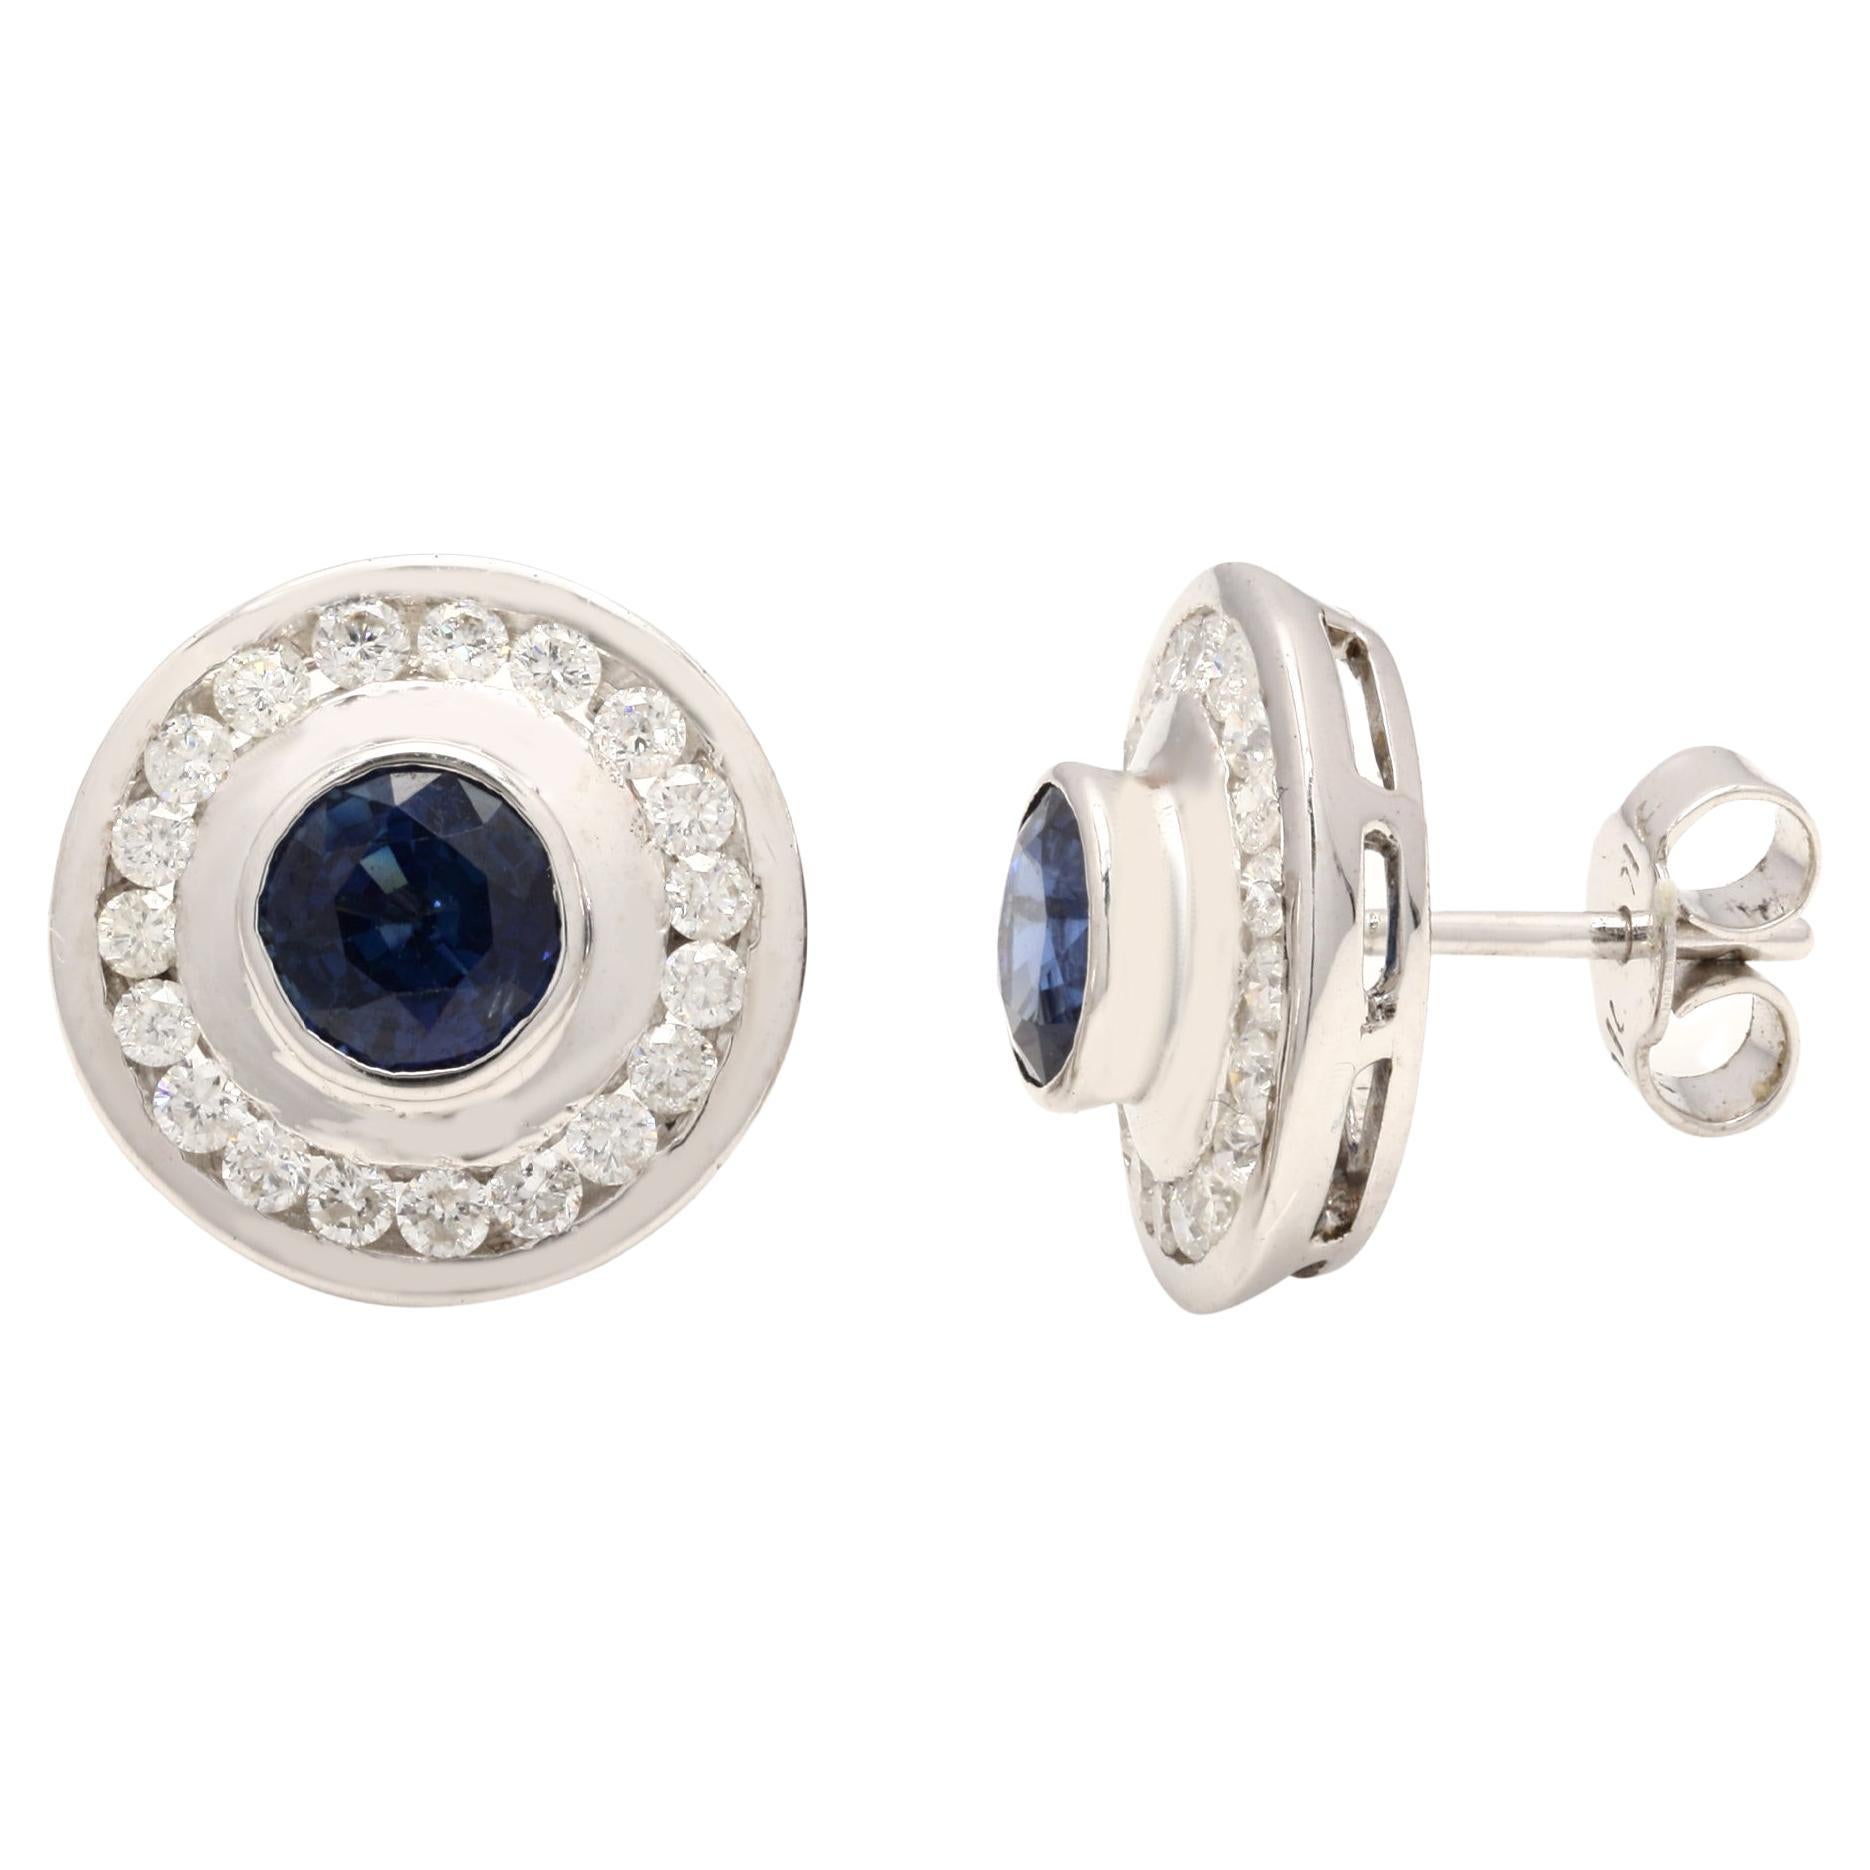 Blue Sapphire Everyday Stud Earrings Mounted in 14k White Gold with Diamonds